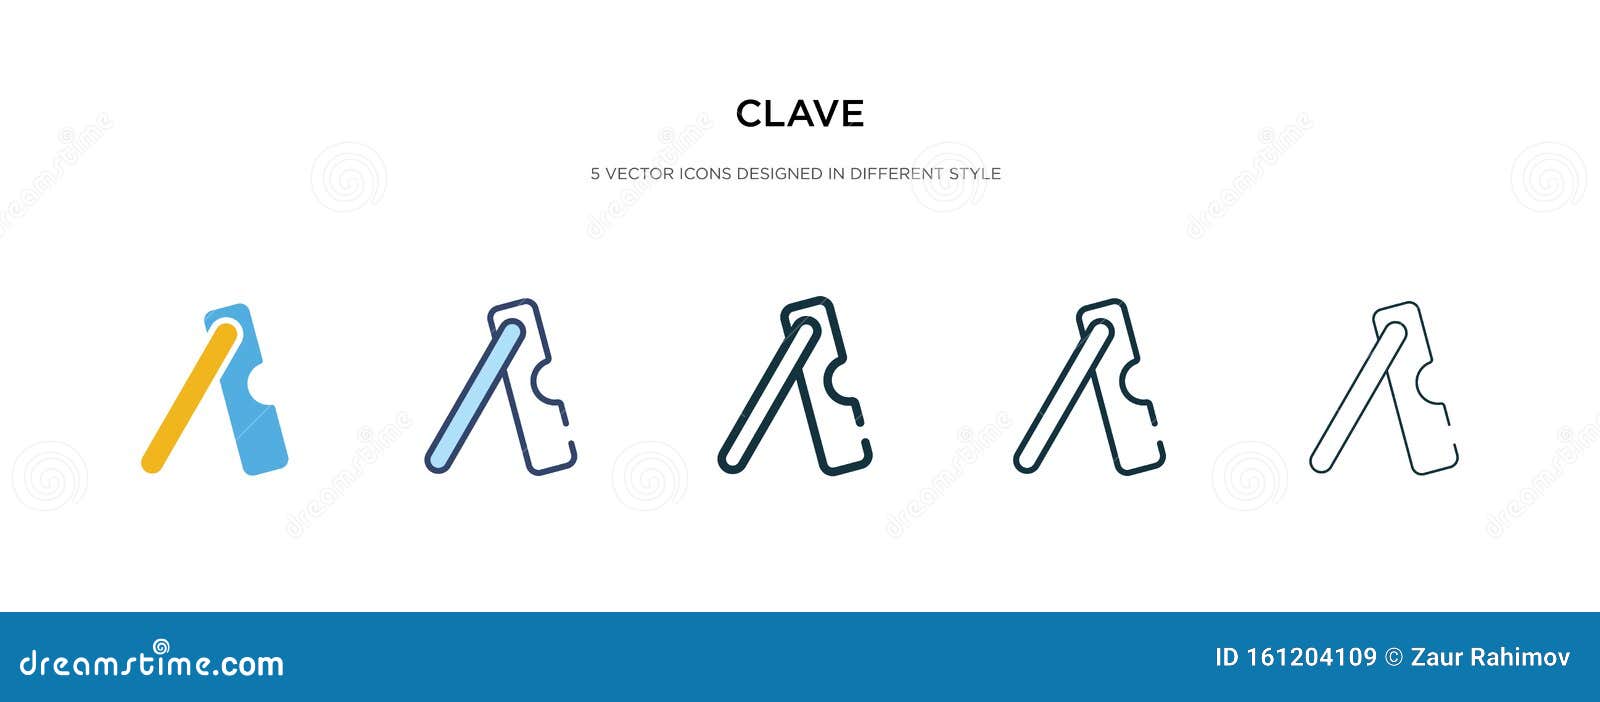 clave icon in different style  . two colored and black clave  icons ed in filled, outline, line and